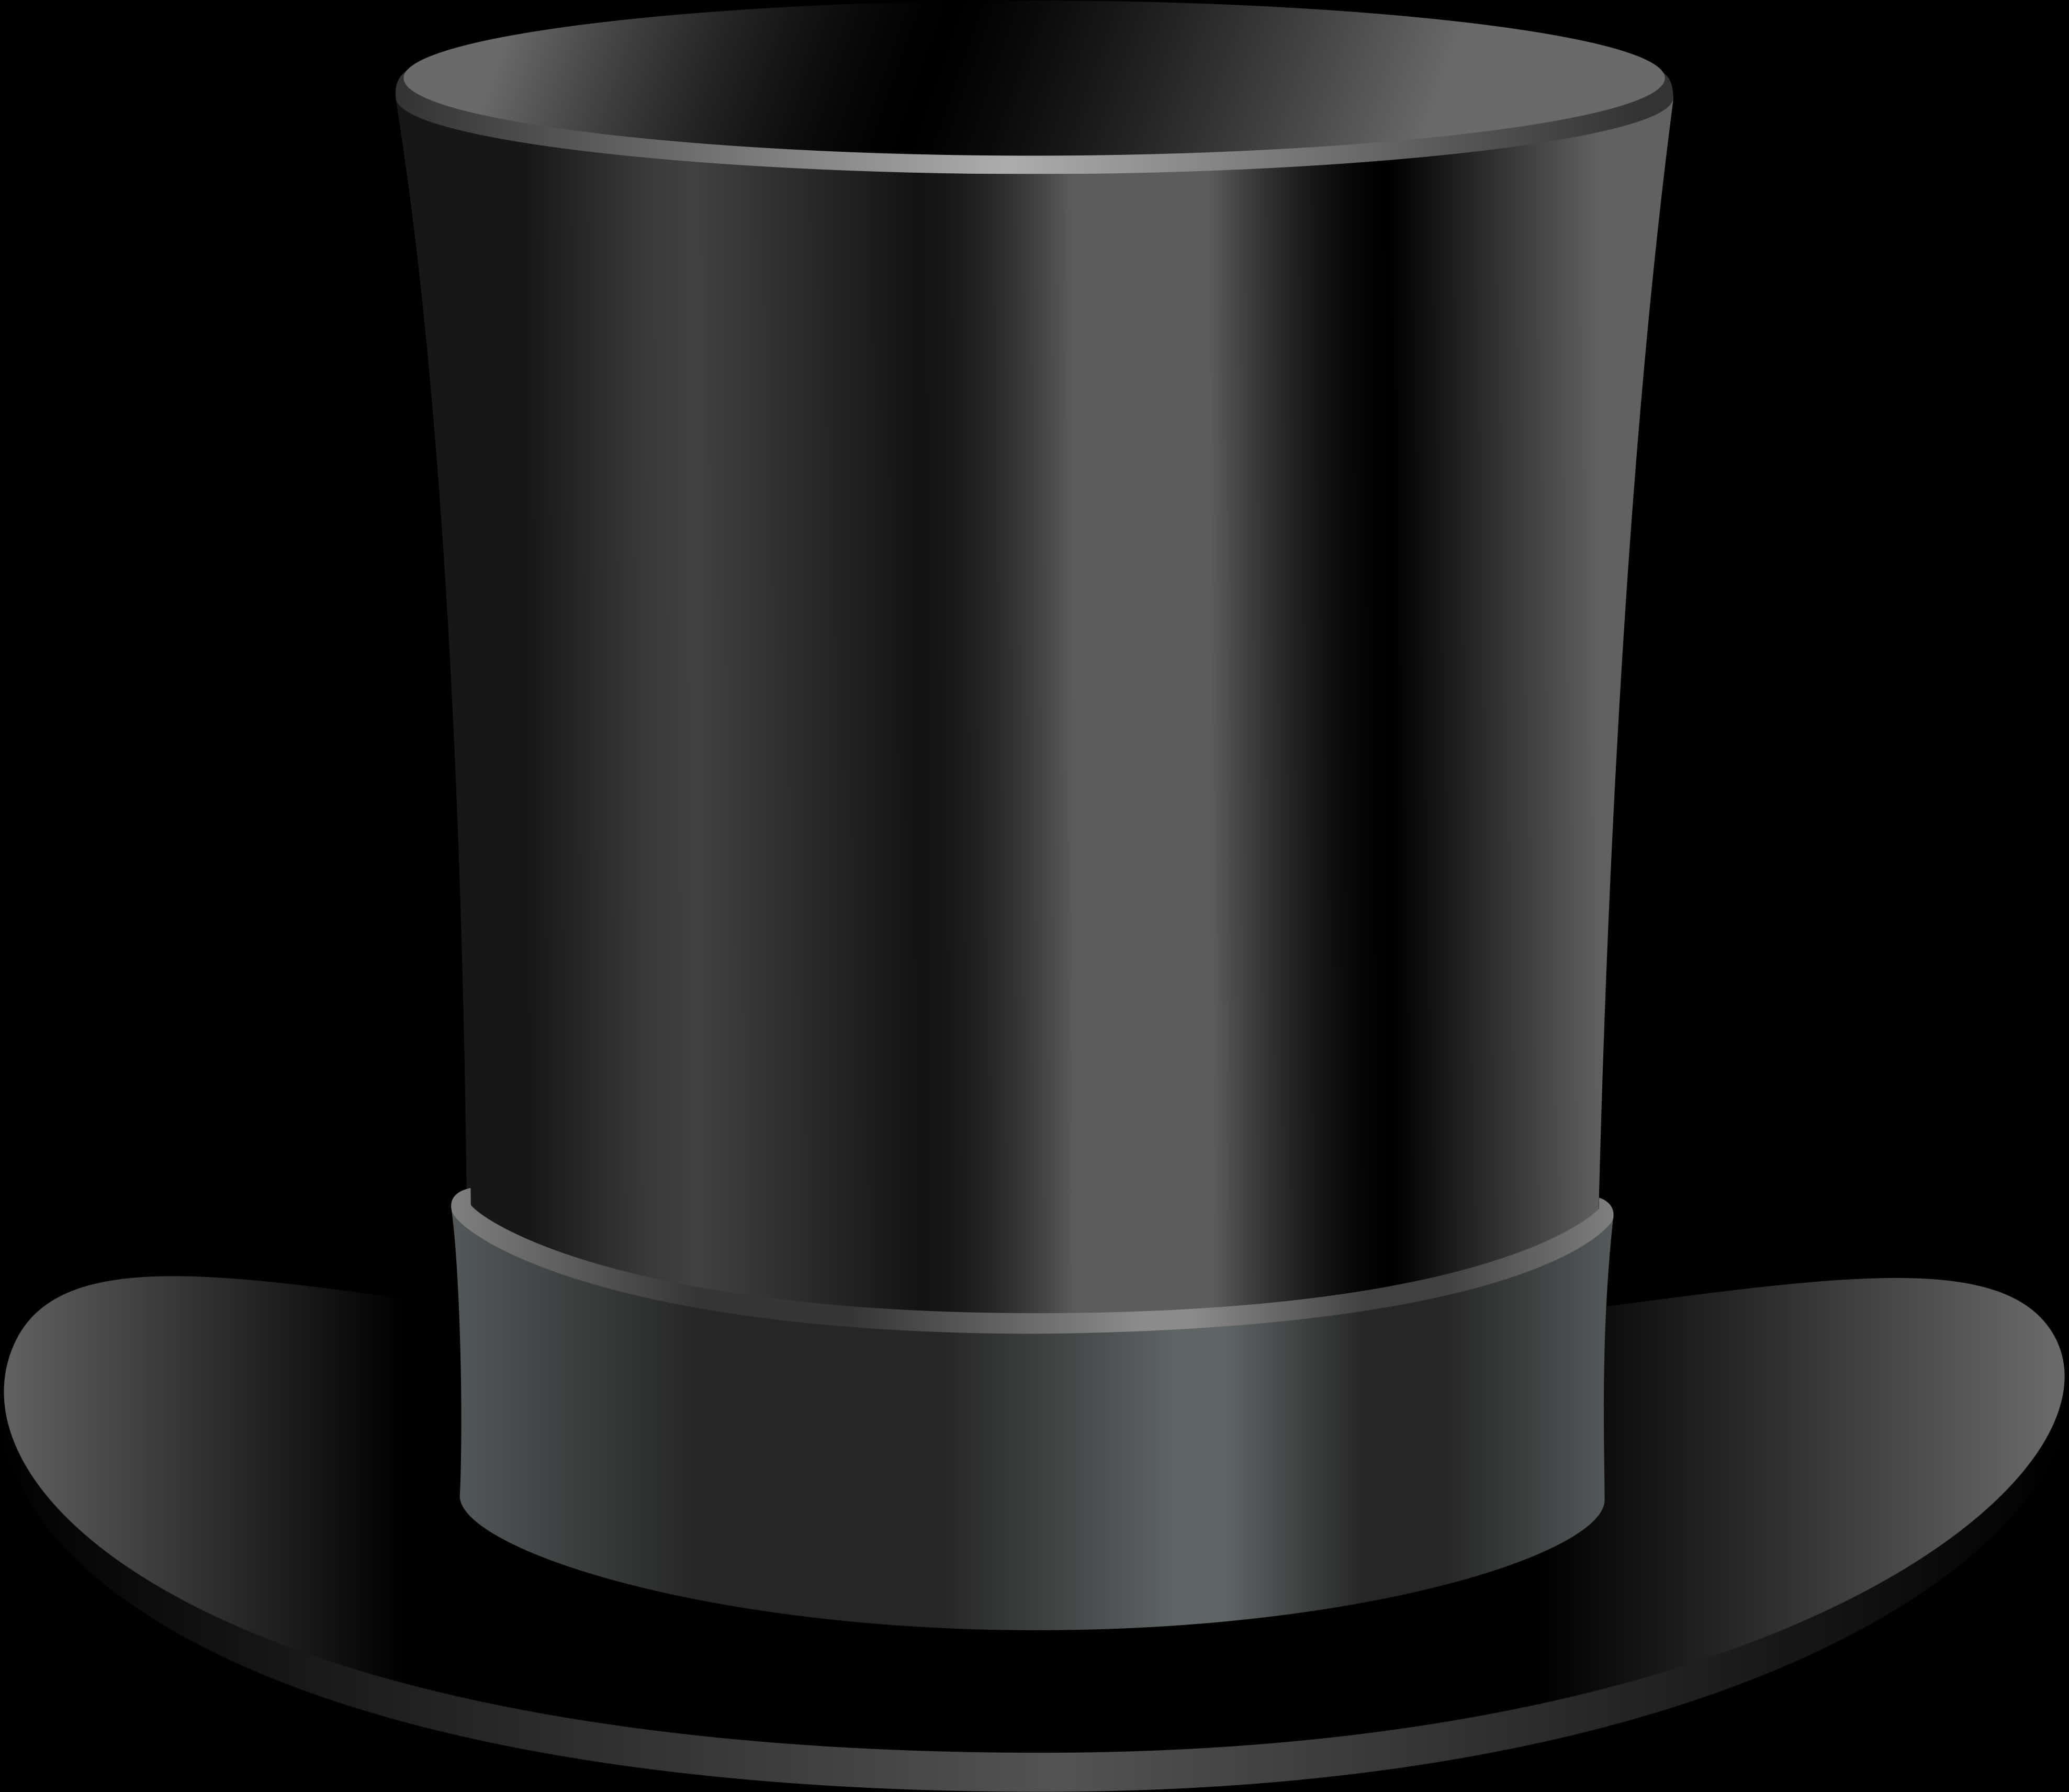 A Black Top Hat On A Black Background